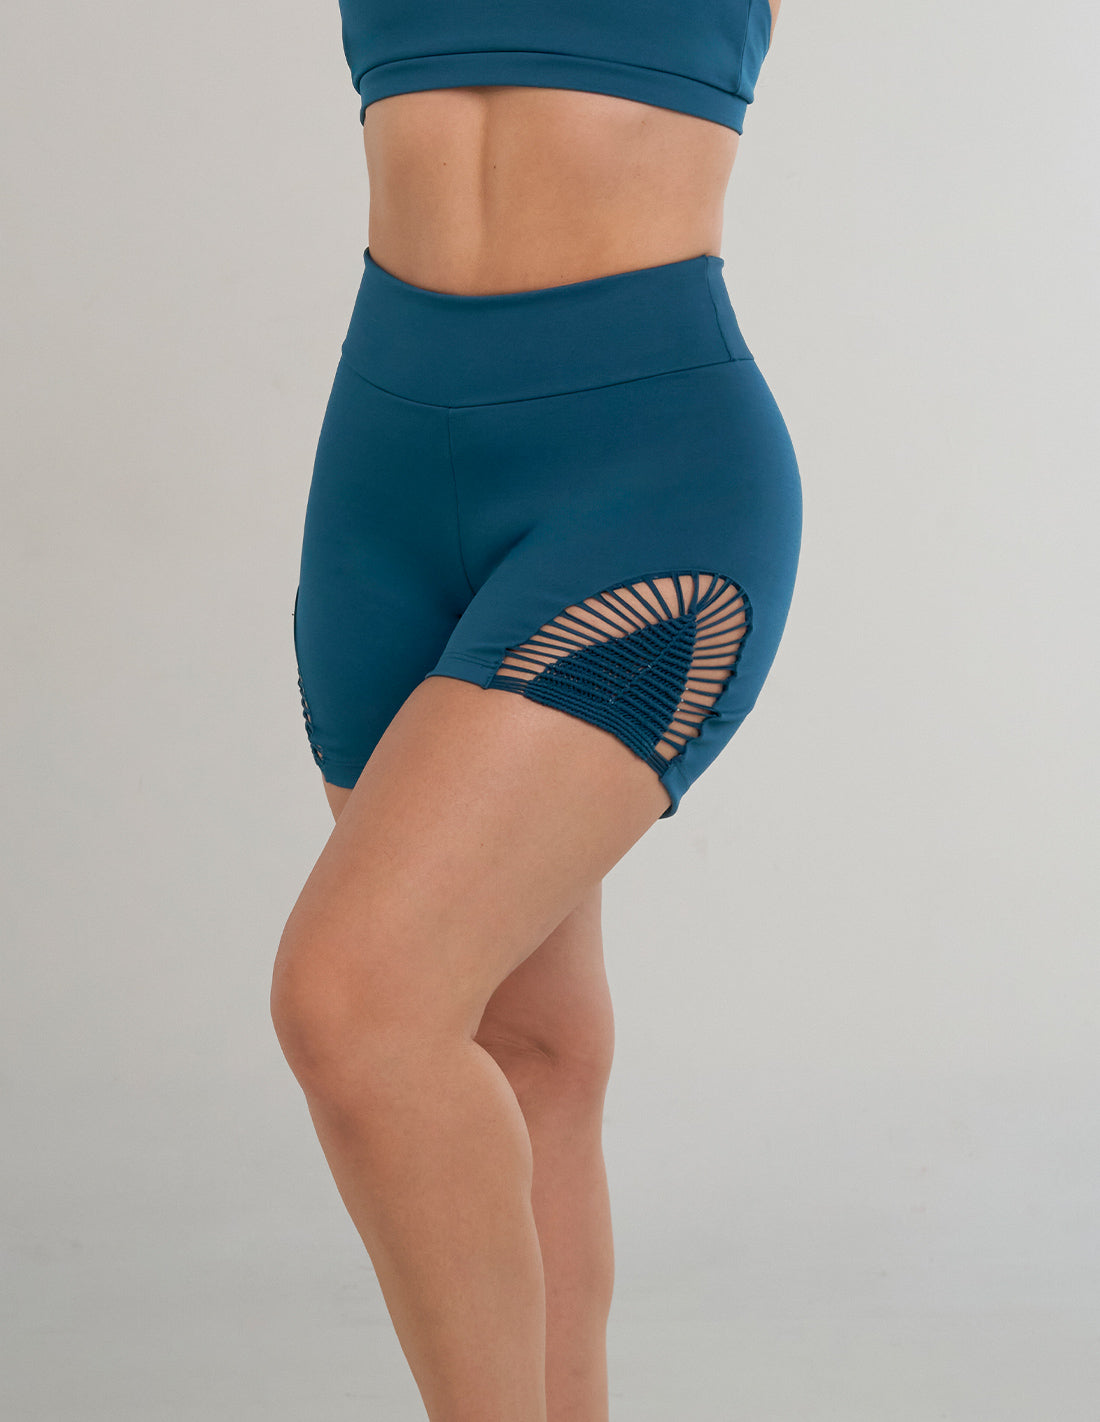 Glow Legging Shorts Oil. Hand-Dyed Legging Shorts With Hand Woven Macramé In Oil. Entreaguas